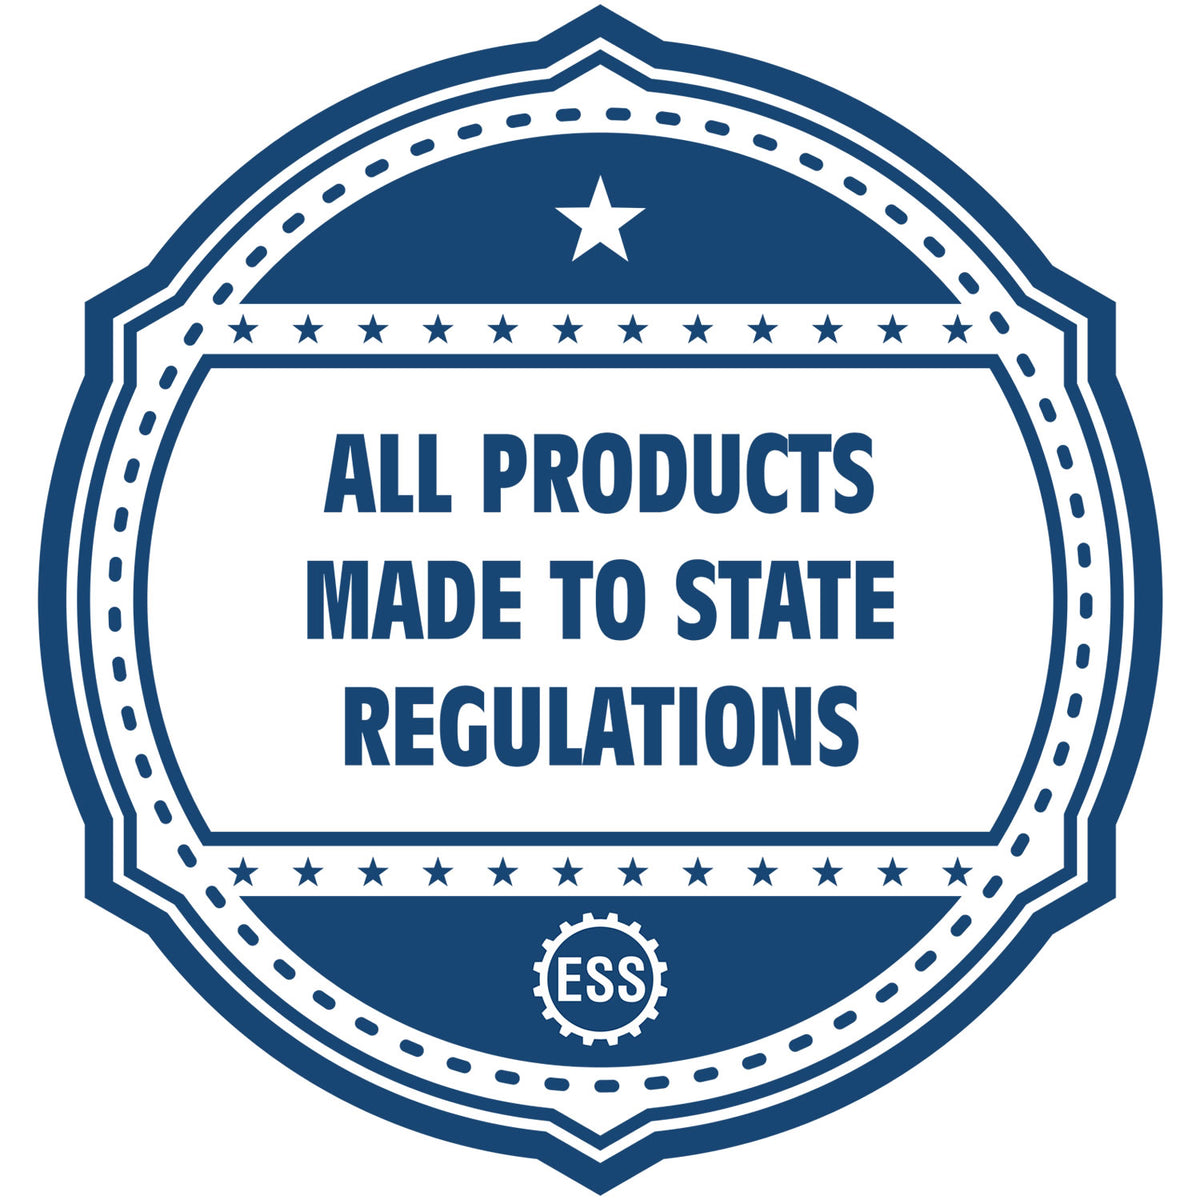 An icon or badge element for the Massachusetts Engineer Desk Seal showing that this product is made in compliance with state regulations.